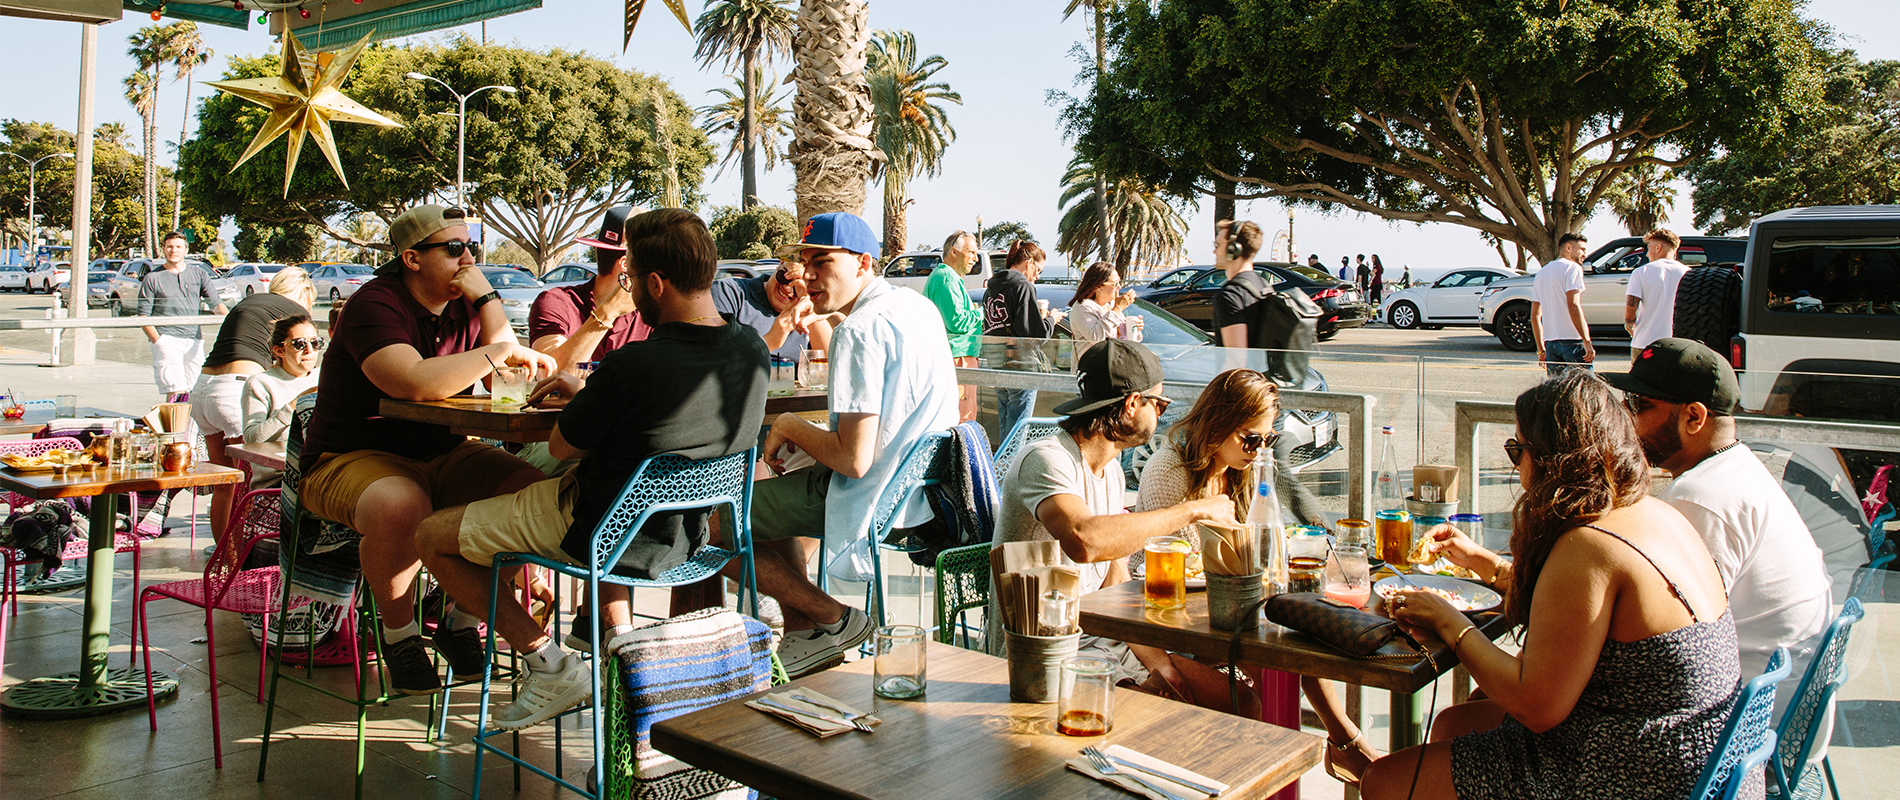 Outdoor Dining at Blue Plate Taco in Santa Monica